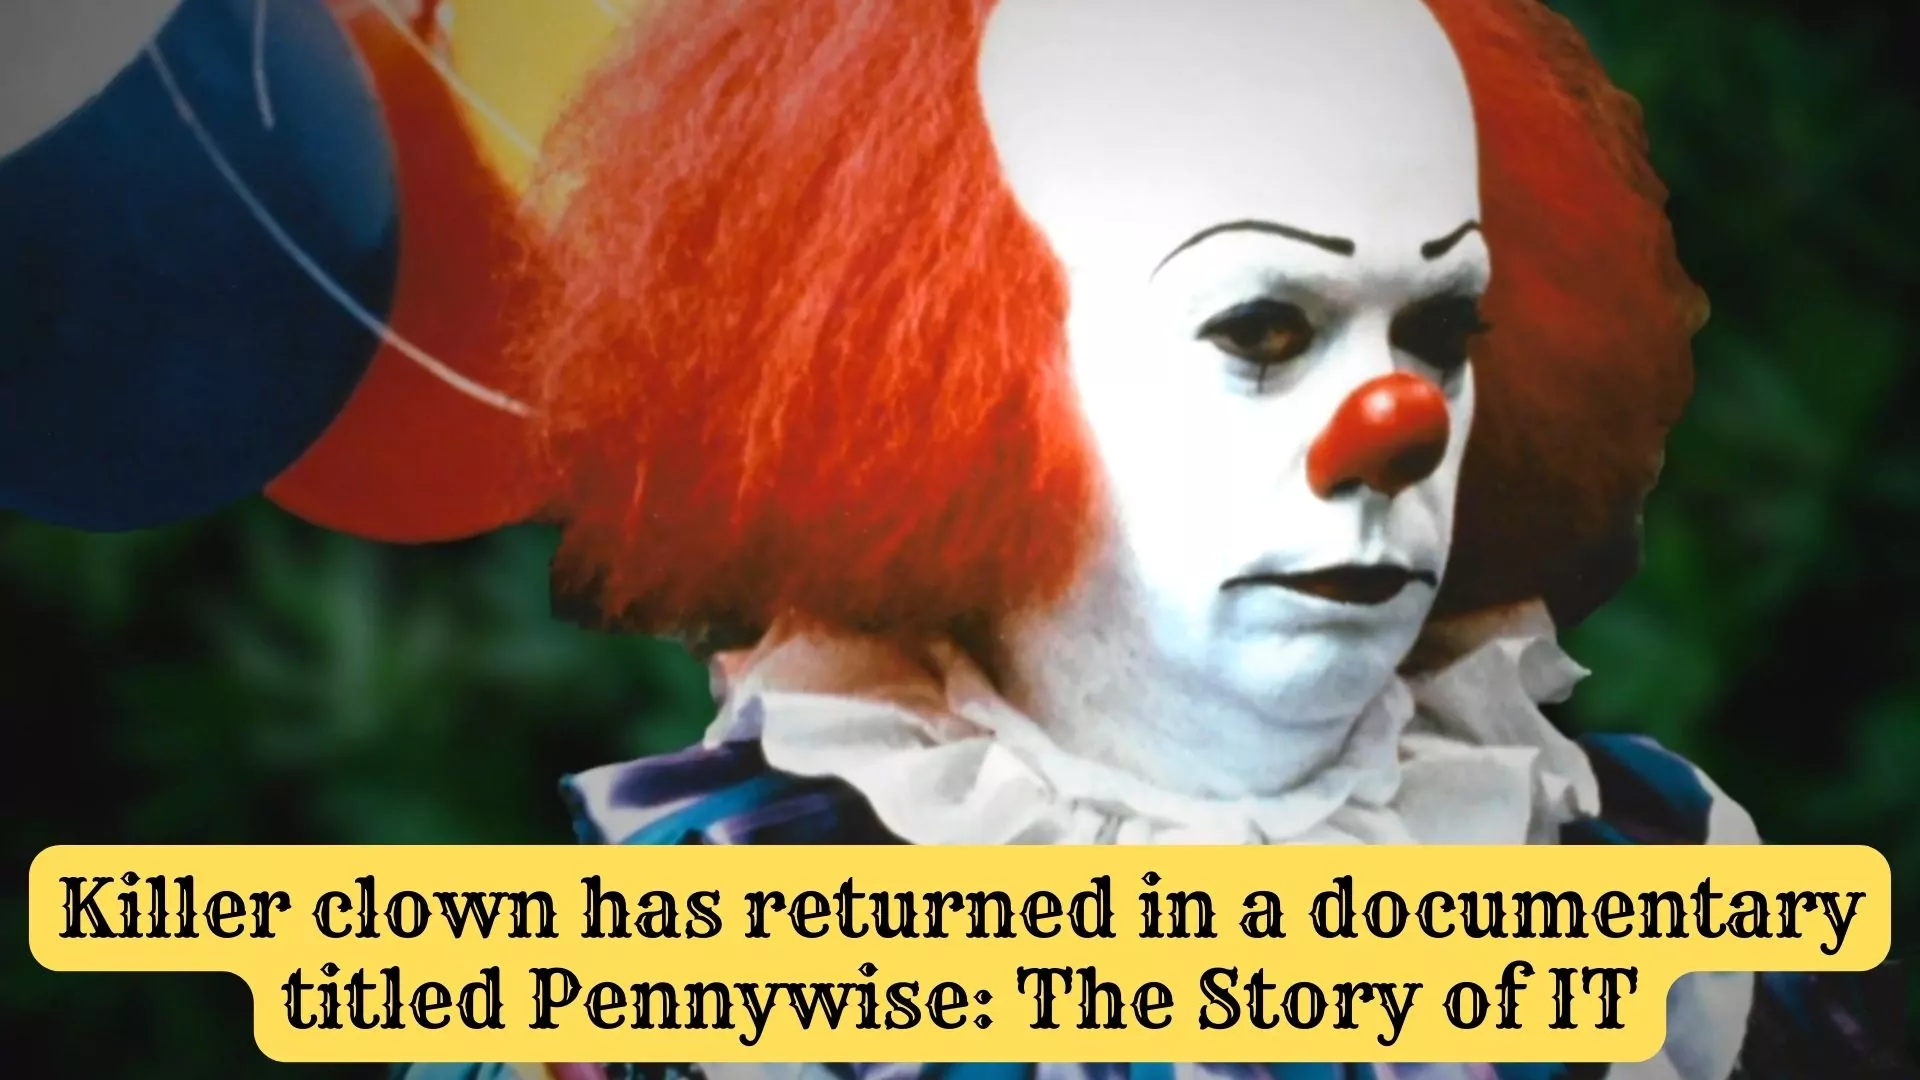 Killer clown returned in a documentary titled Pennywise: The Story of IT